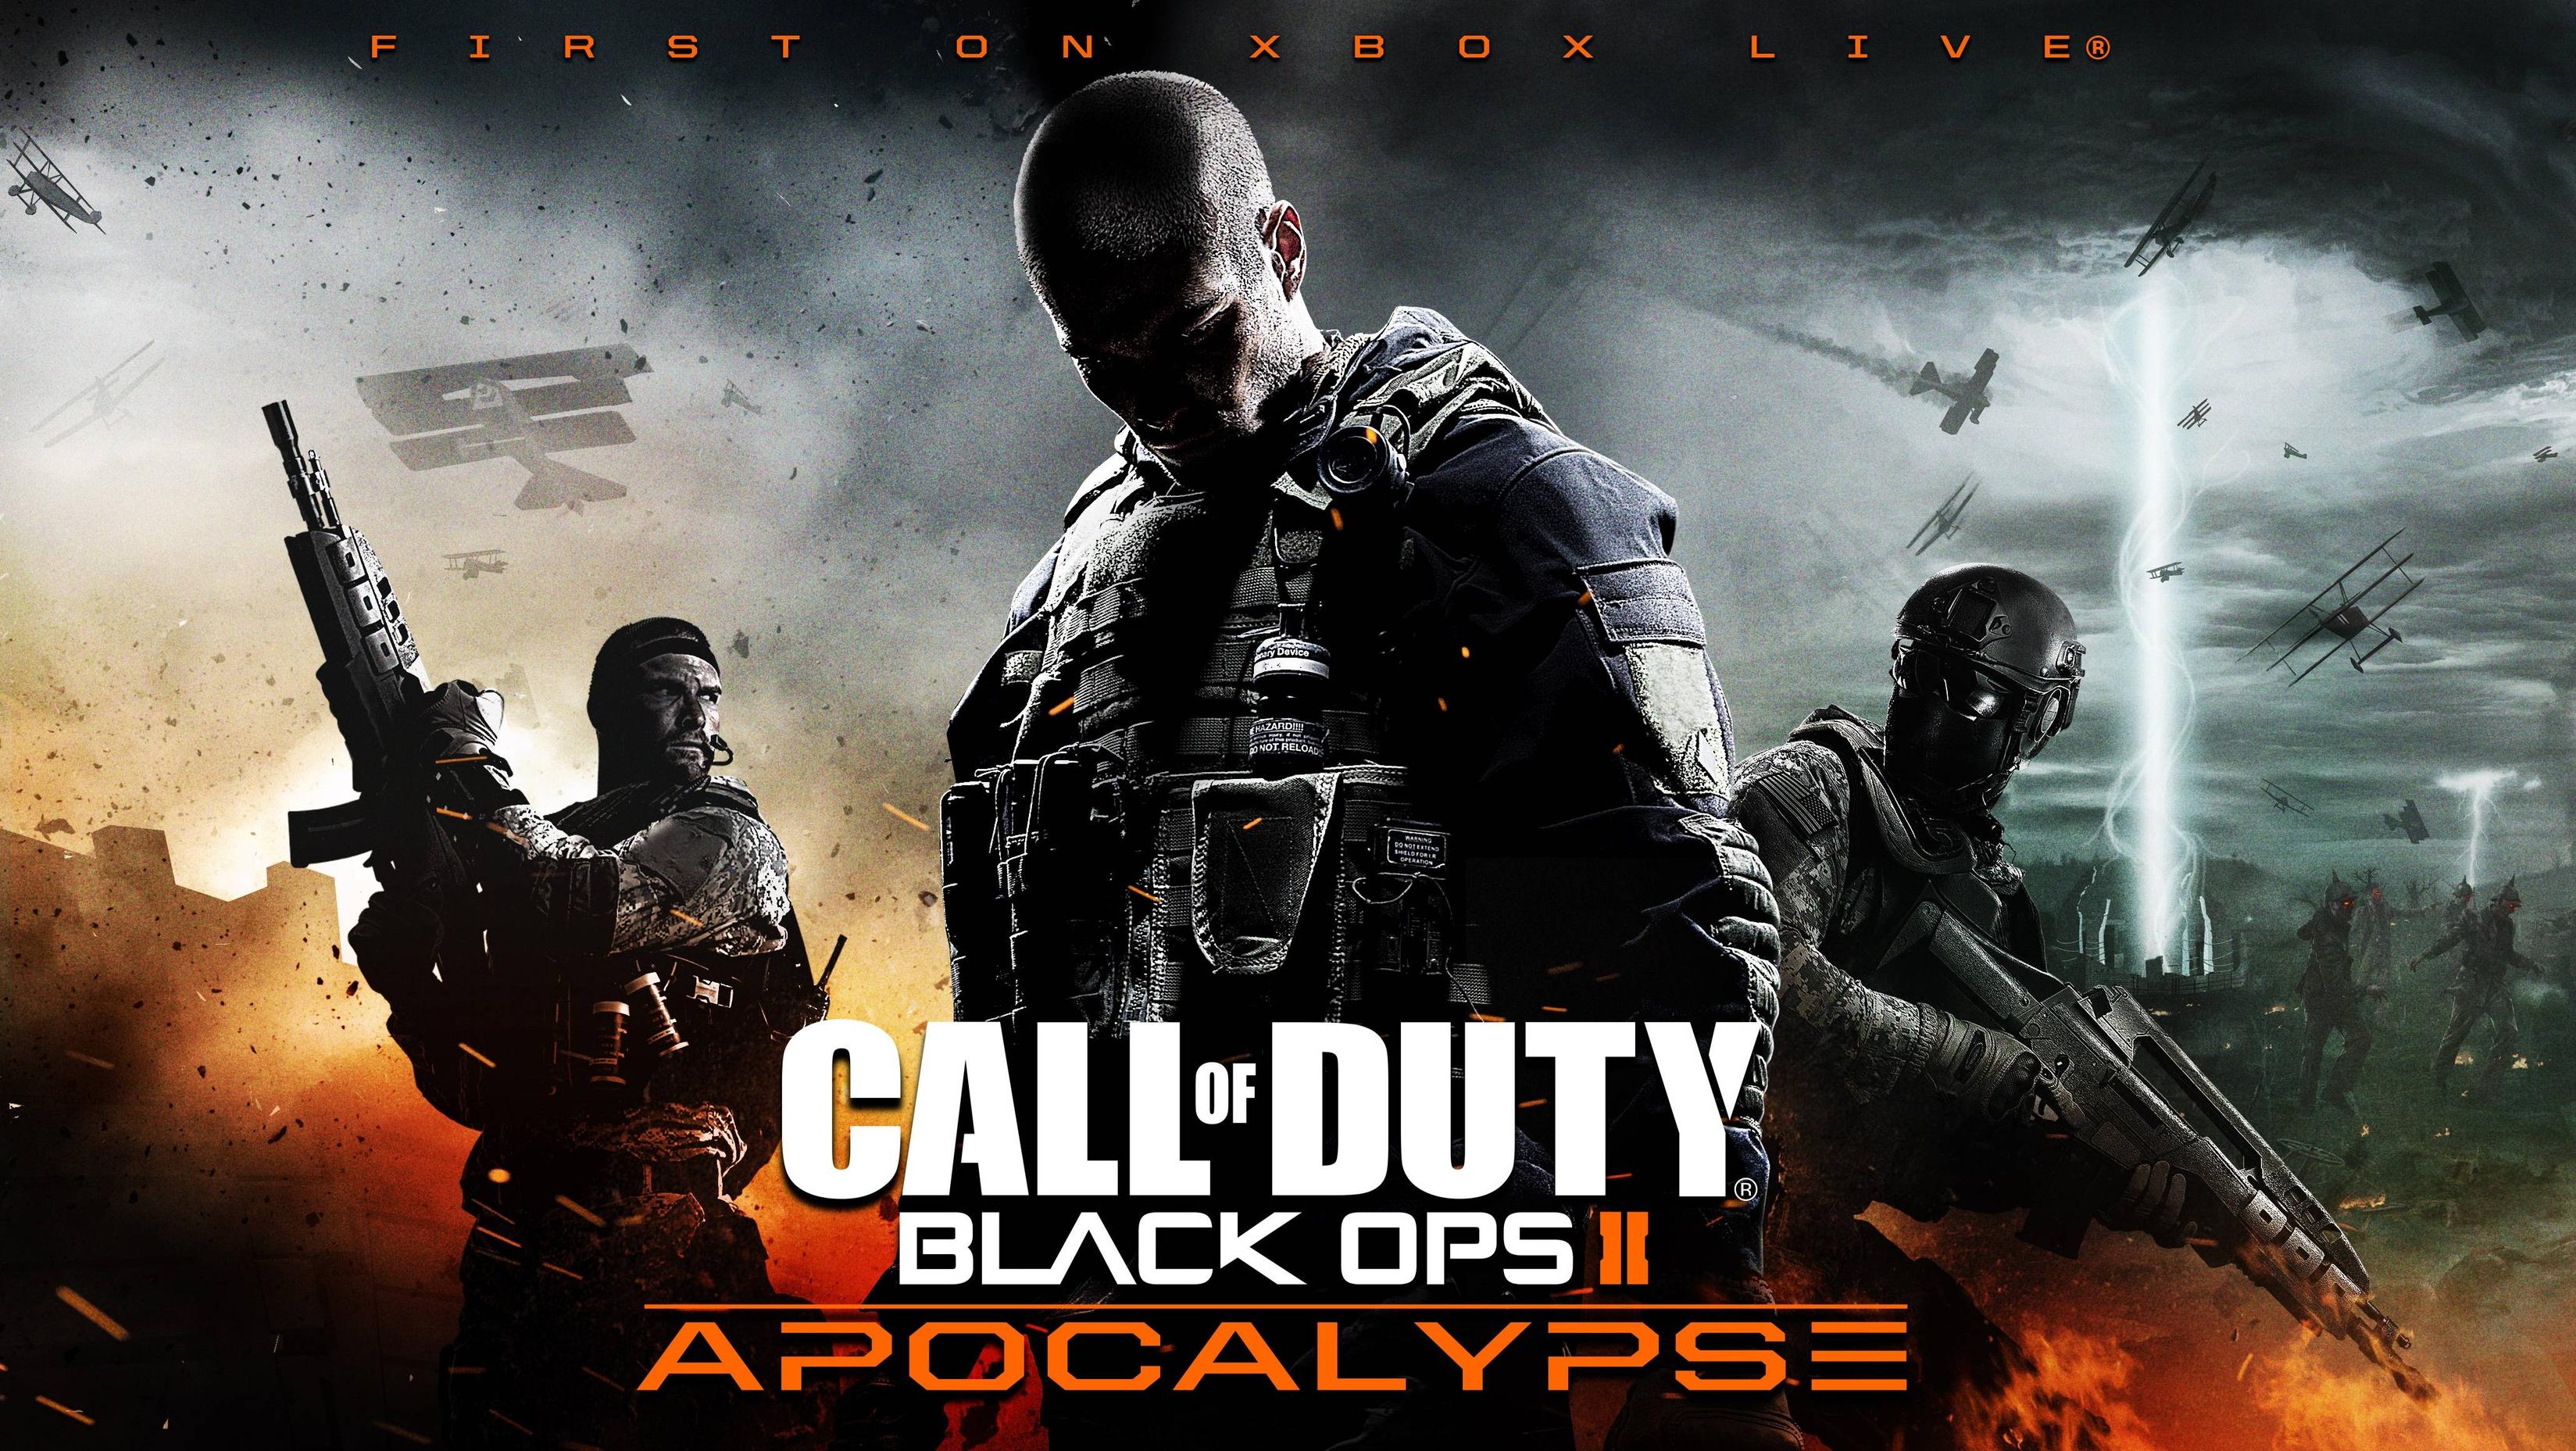 call of duty 2 black ops